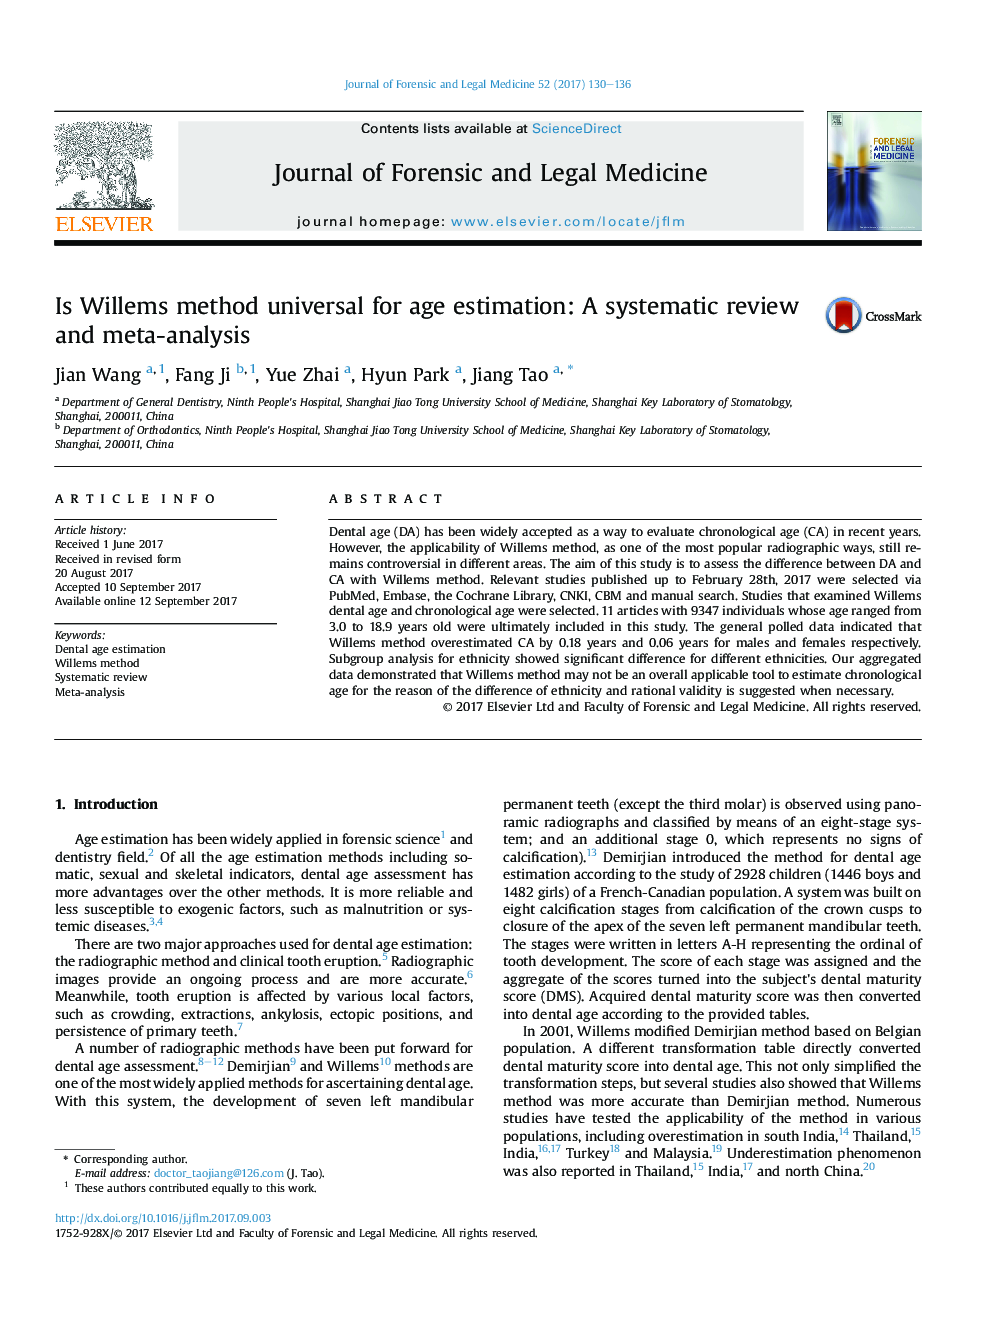 Is Willems method universal for age estimation: A systematic review and meta-analysis